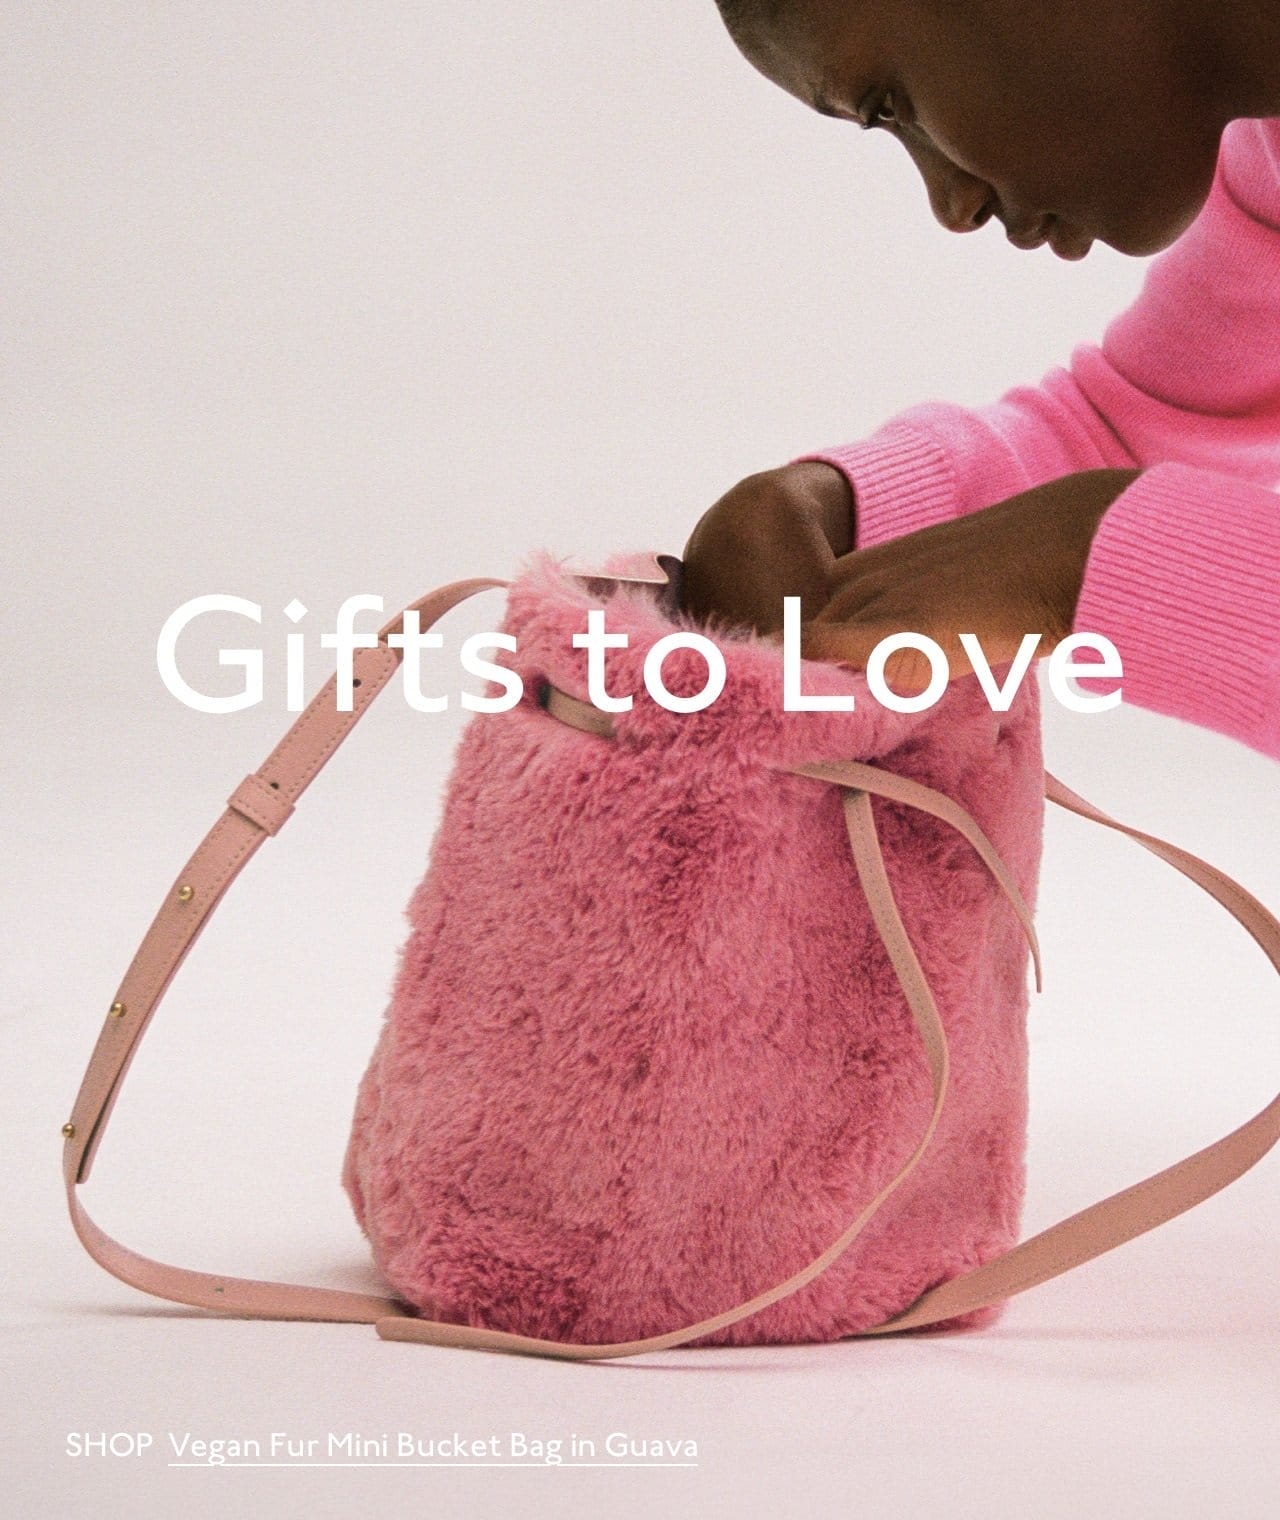 Shop gifts to love by today, December 13 to receive your gifts with free shipping by December 24.